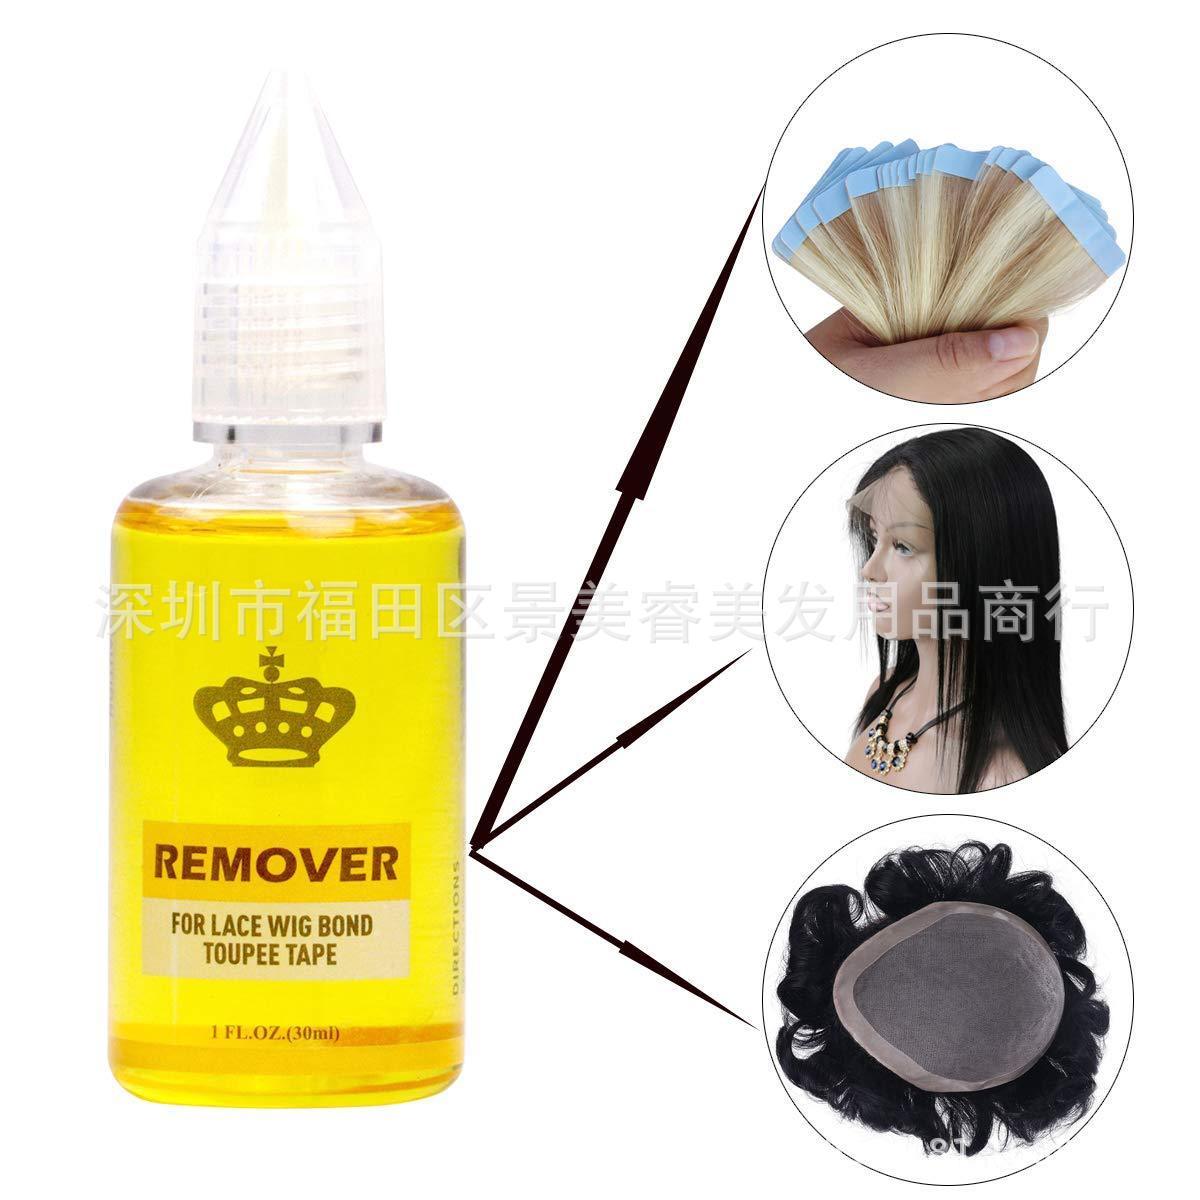 Wig removing glue new upgraded version s...